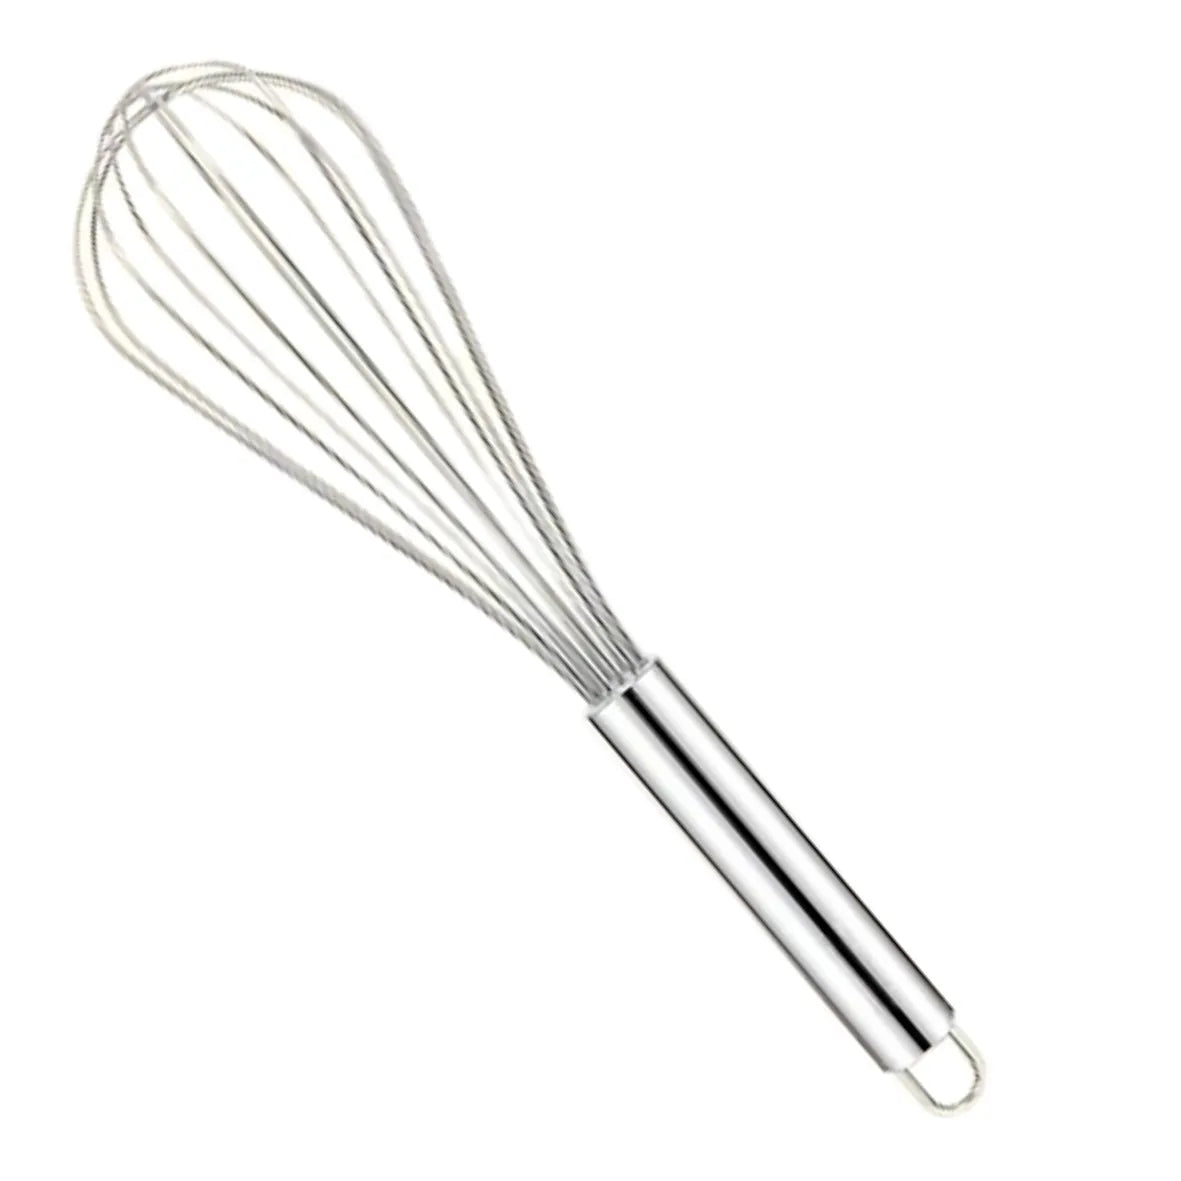 Stainless Steel Hand Whisk 12 inch - thebakingtools.com